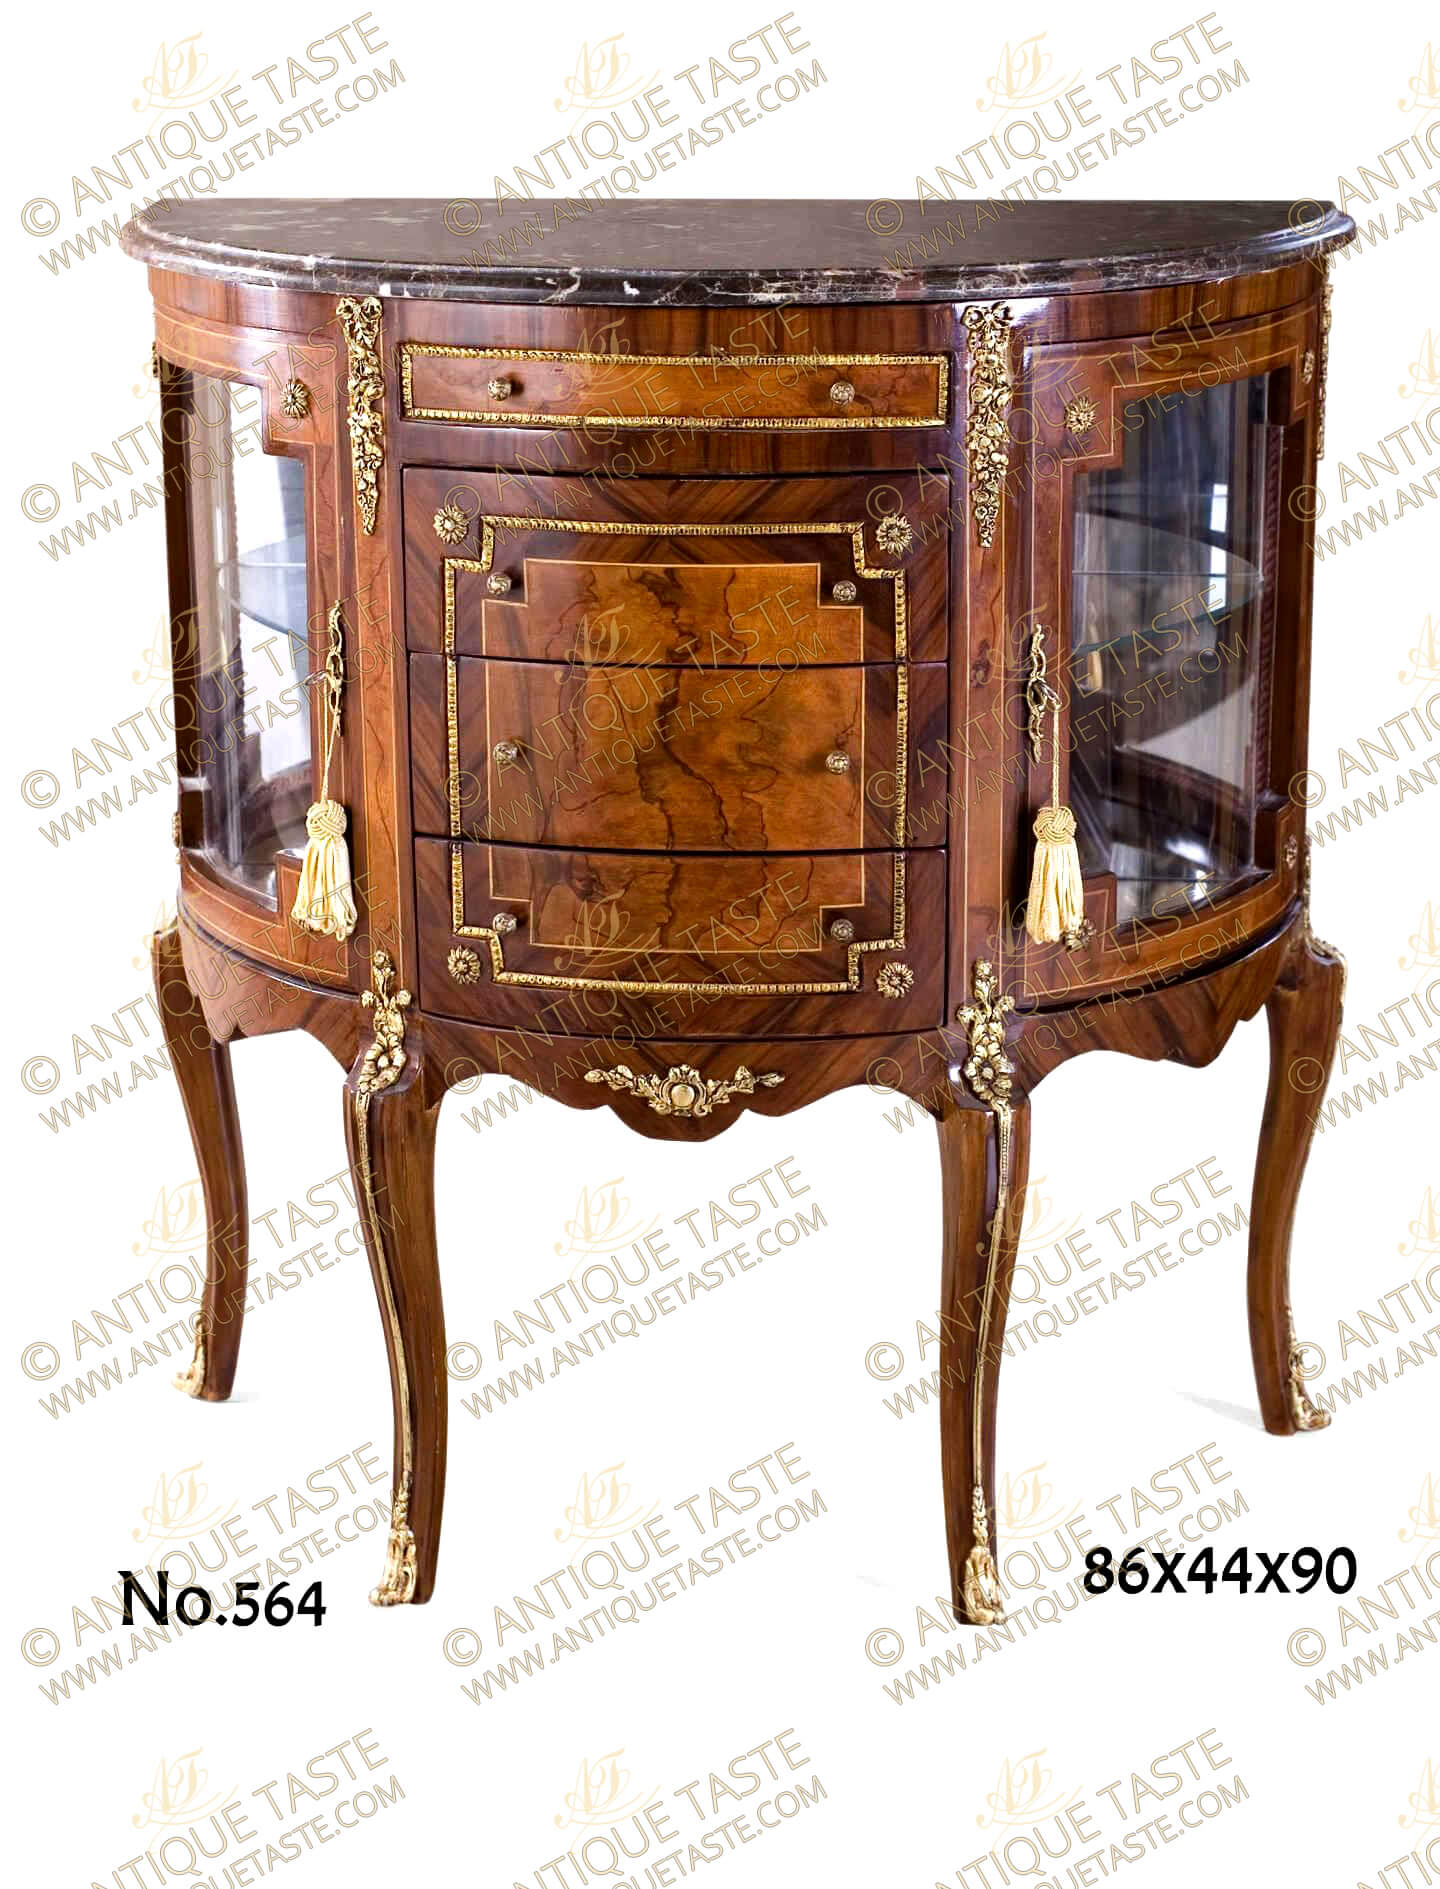 A decorative French Louis 15th style ormolu-mounted Demilune shaped Display Cabinet; veneer inlaid in two types of veneers, with two doors and four drawers, decorated with ribbon tied blossoming chutes, ormolu moulded encadrements and ormolu sabots.